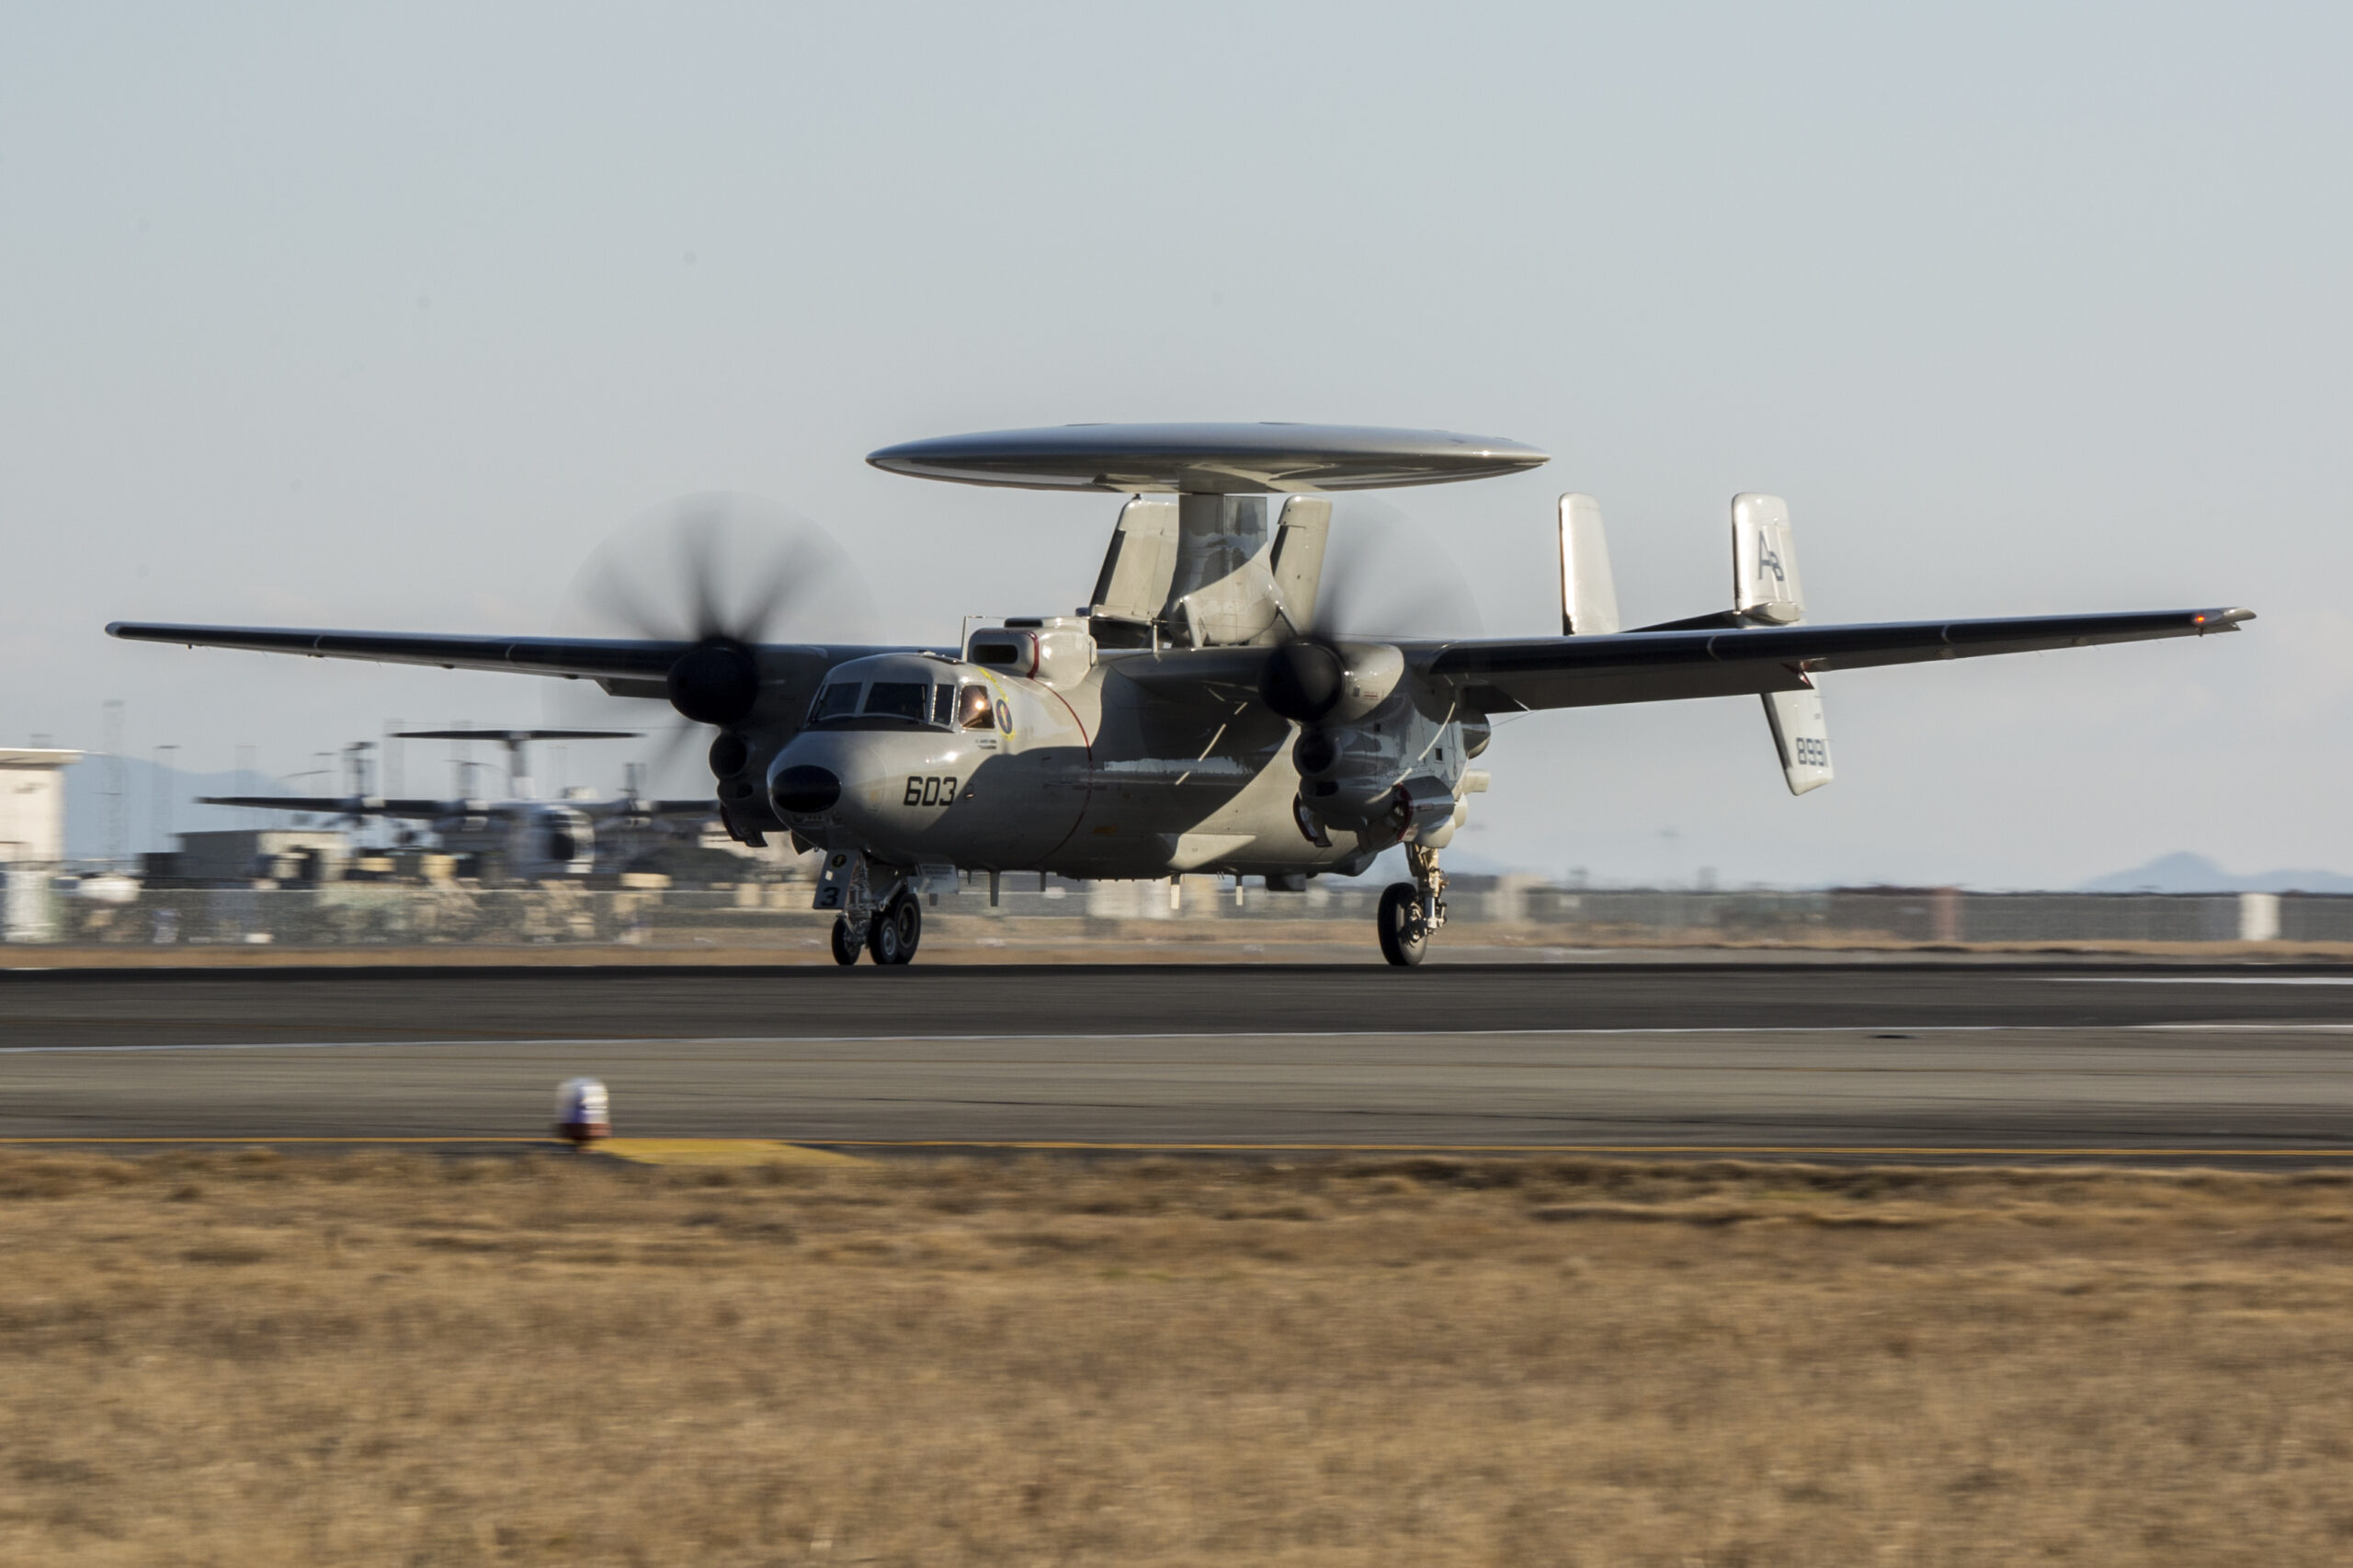 A U.S. Navy E-2D Advanced Hawkeye with Carrier Airborne Early Warning Squadron (VAW) 125, lands at Marine Corps Air Station Iwakuni, Japan, Feb. 2, 2017. VAW-125 arrived at MCAS Iwakuni from Naval Station Norfolk, Va. The E-2D Advanced Hawkeye is equipped with the most advanced airborne radar in the world, possessing systems which increase the capabilities to defend Japan and provide security in the Indo-Asia-Pacific region. (U.S. Marine Corps photo by Cpl. Aaron Henson)